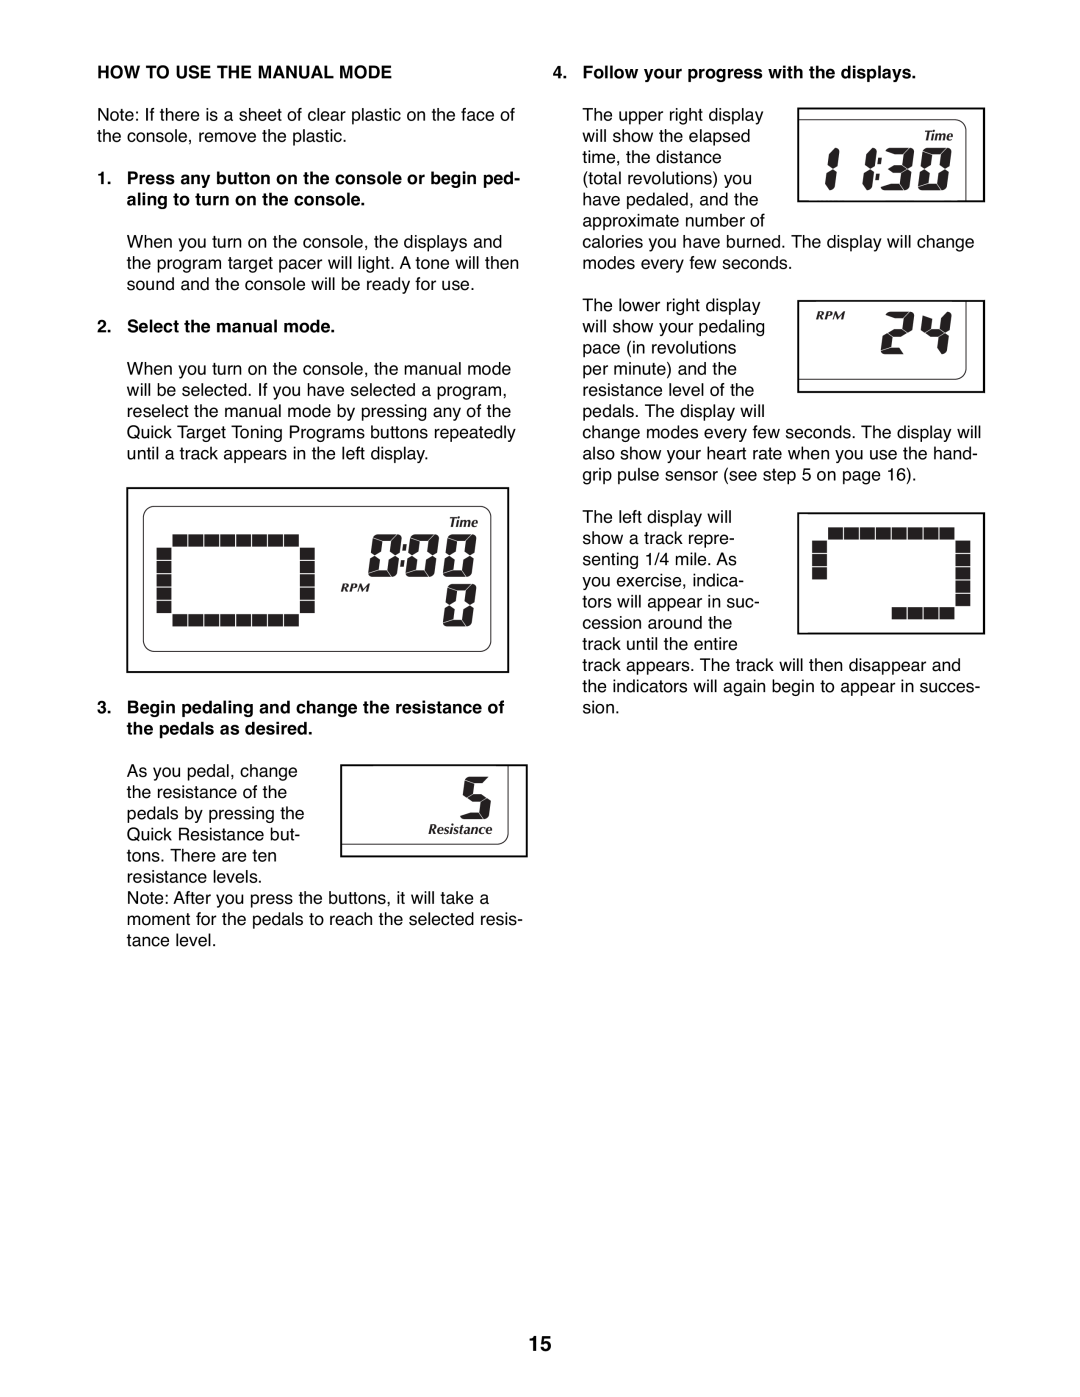 ProForm PFEL73207.0 user manual How To Use The Manual Mode, Select the manual mode, Follow your progress with the displays 